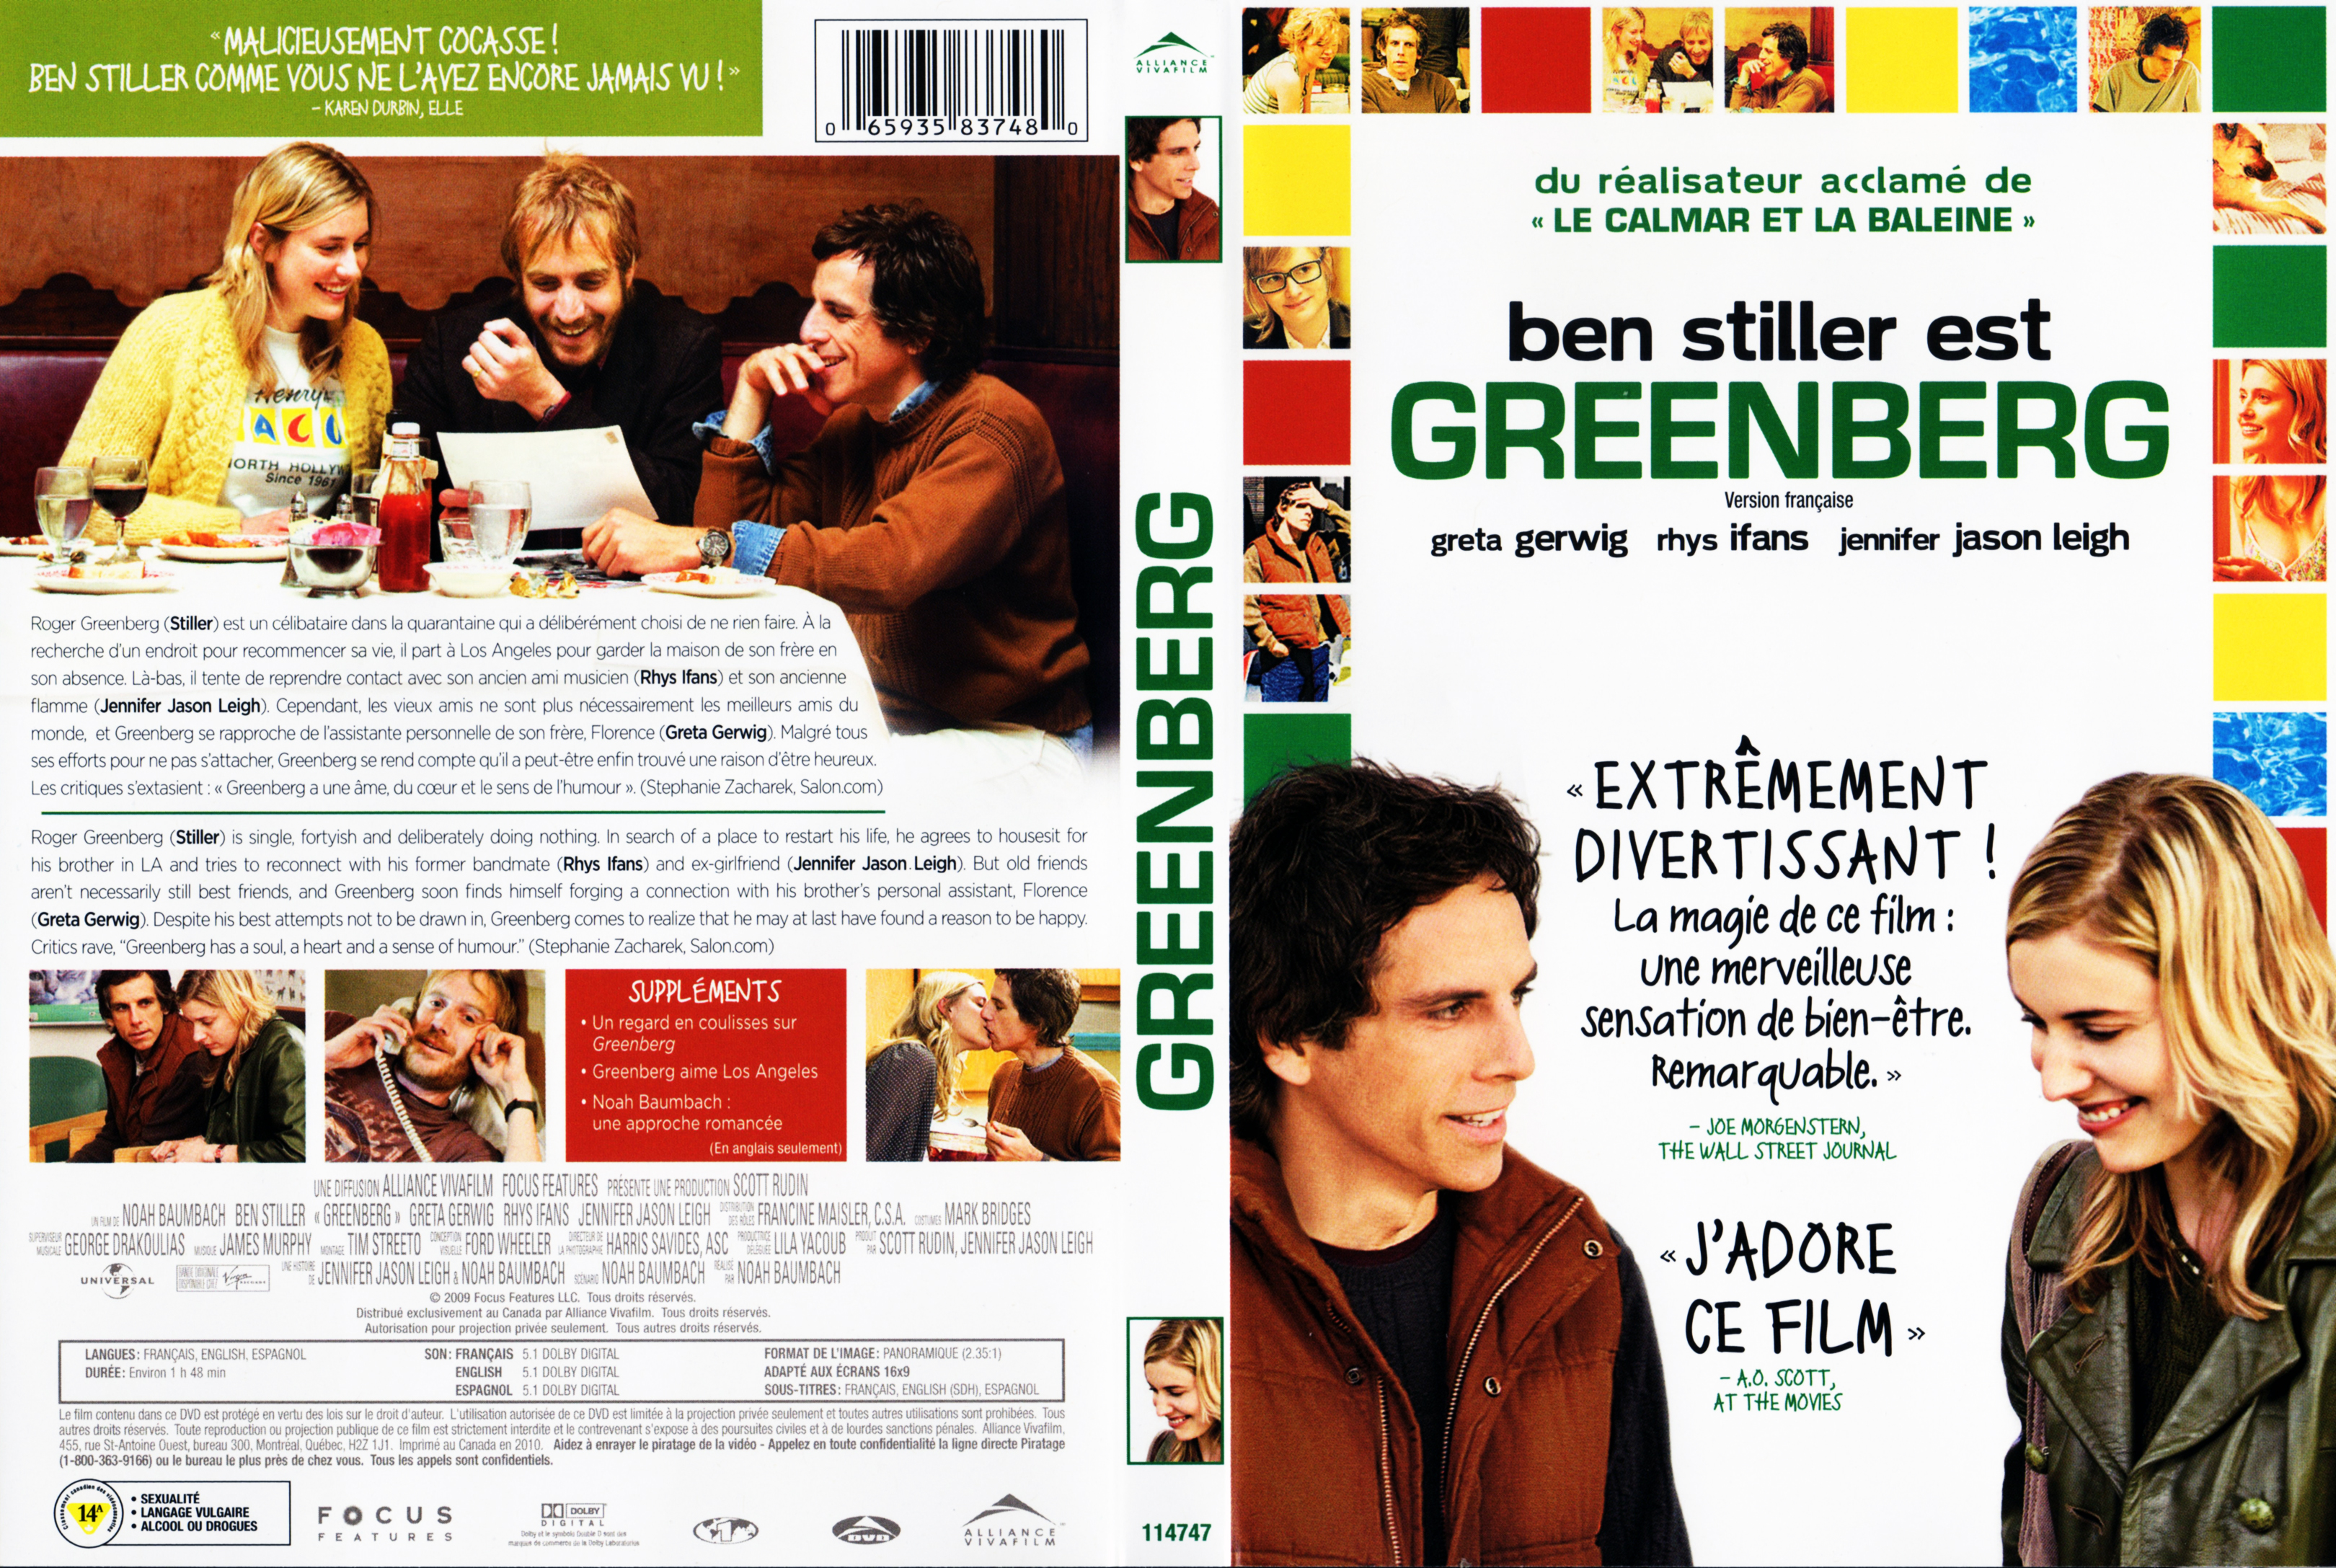 Jaquette DVD Greenberg (Canadienne)